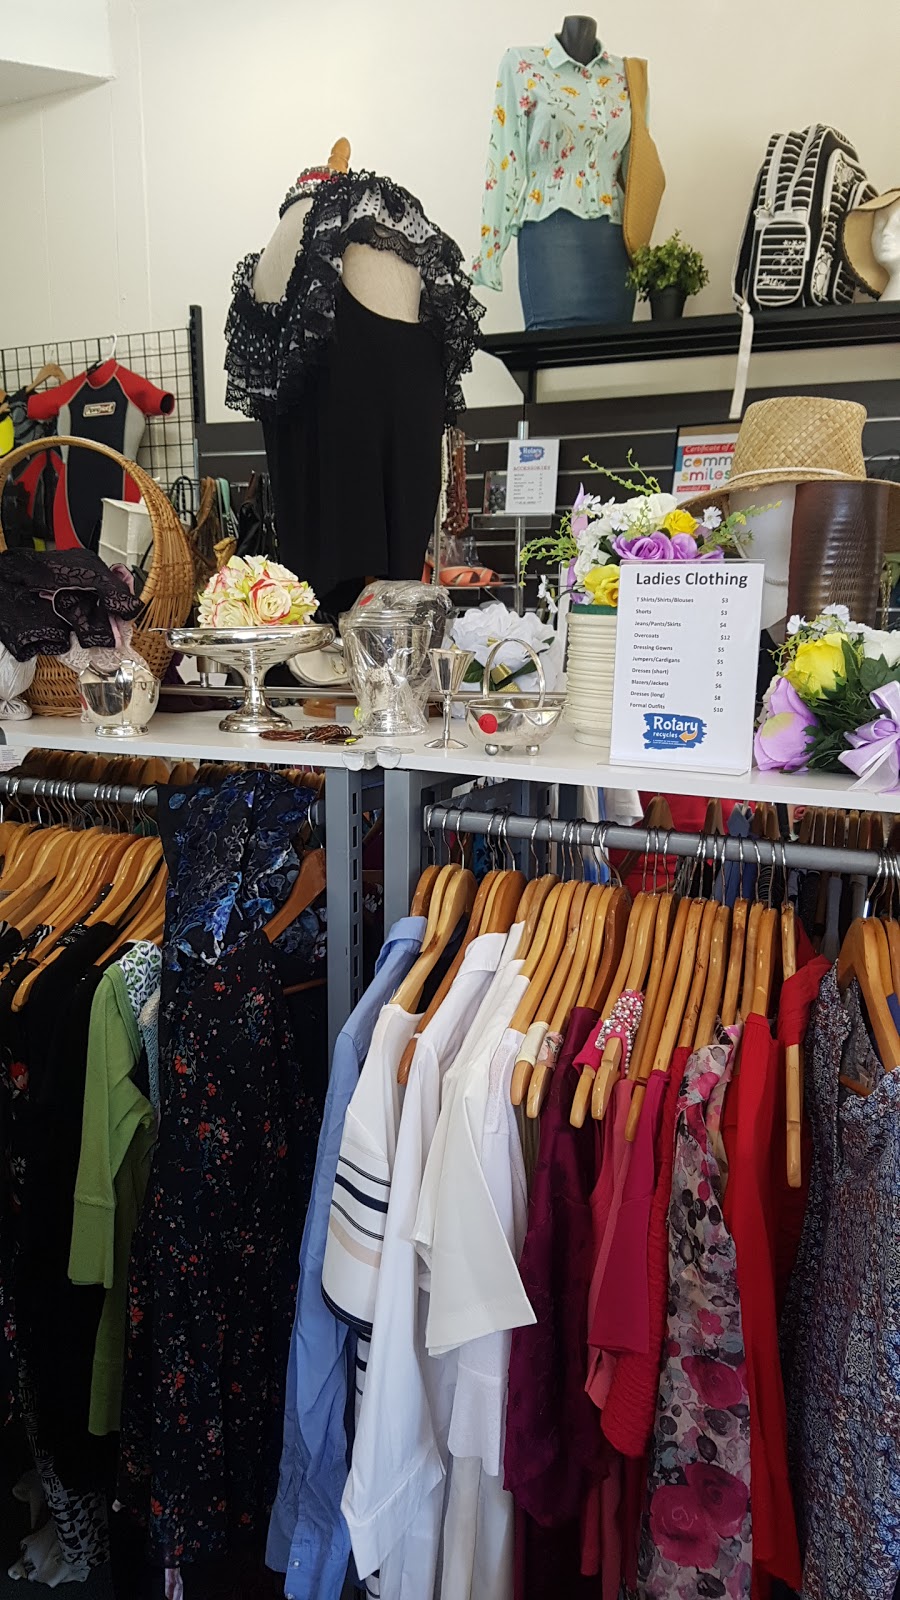 Rotary Recycles OP Shop | store | 156 Great Western Hwy, Blaxland NSW 2774, Australia